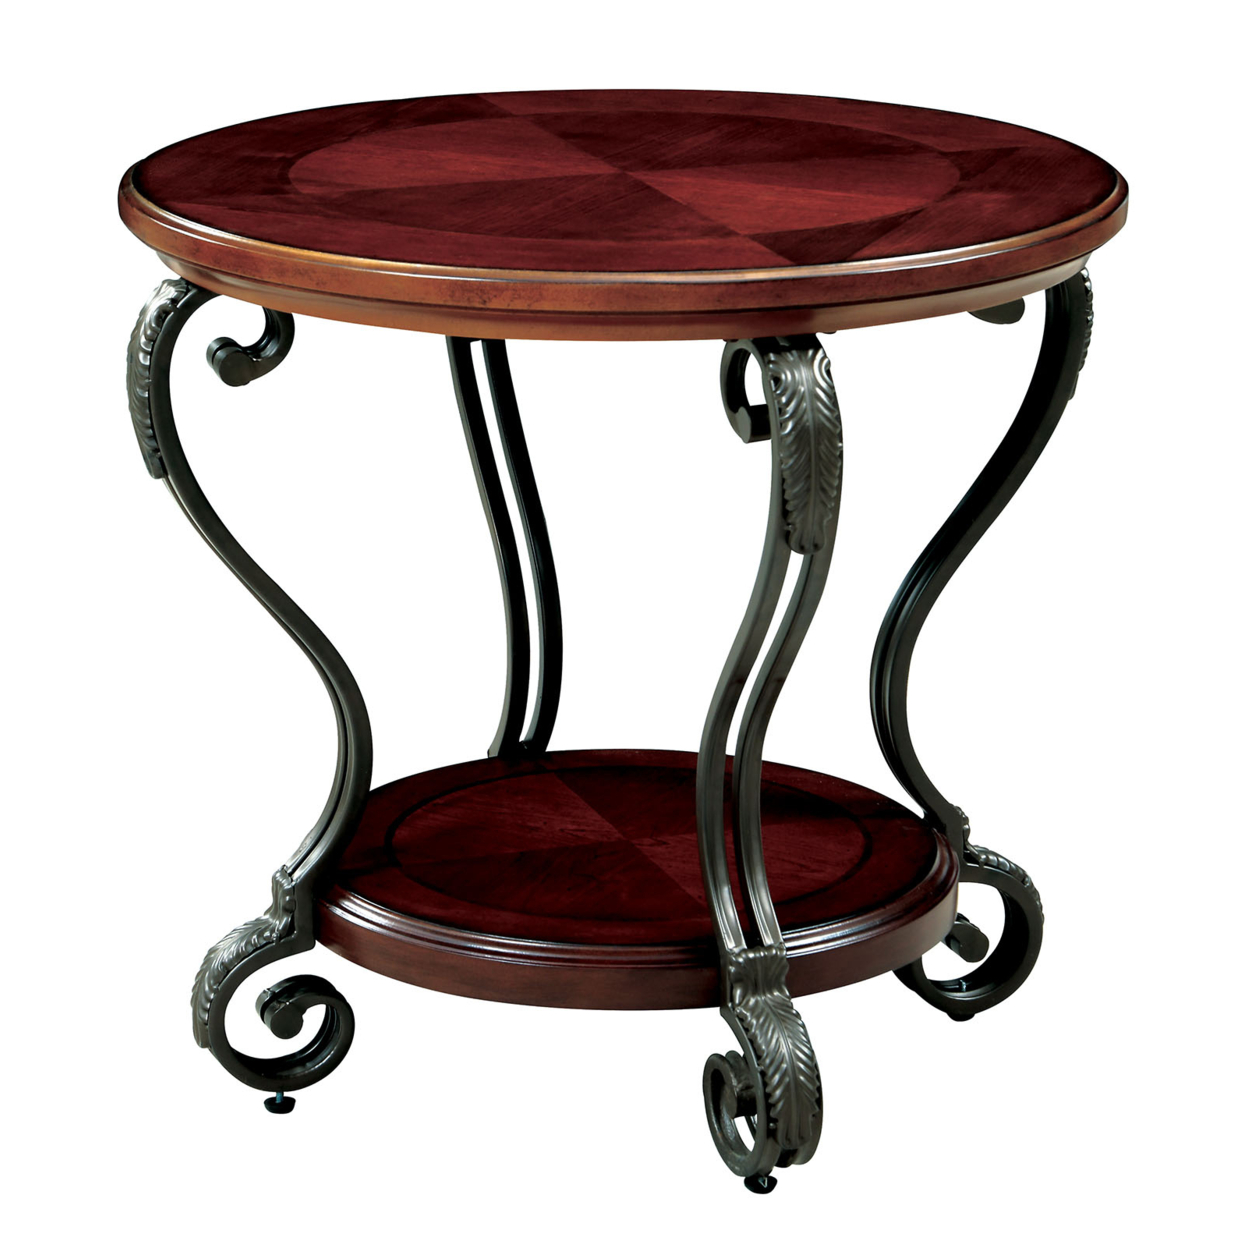 Round Wood And Metal End Table With Scroll Details, Brown- Saltoro Sherpi